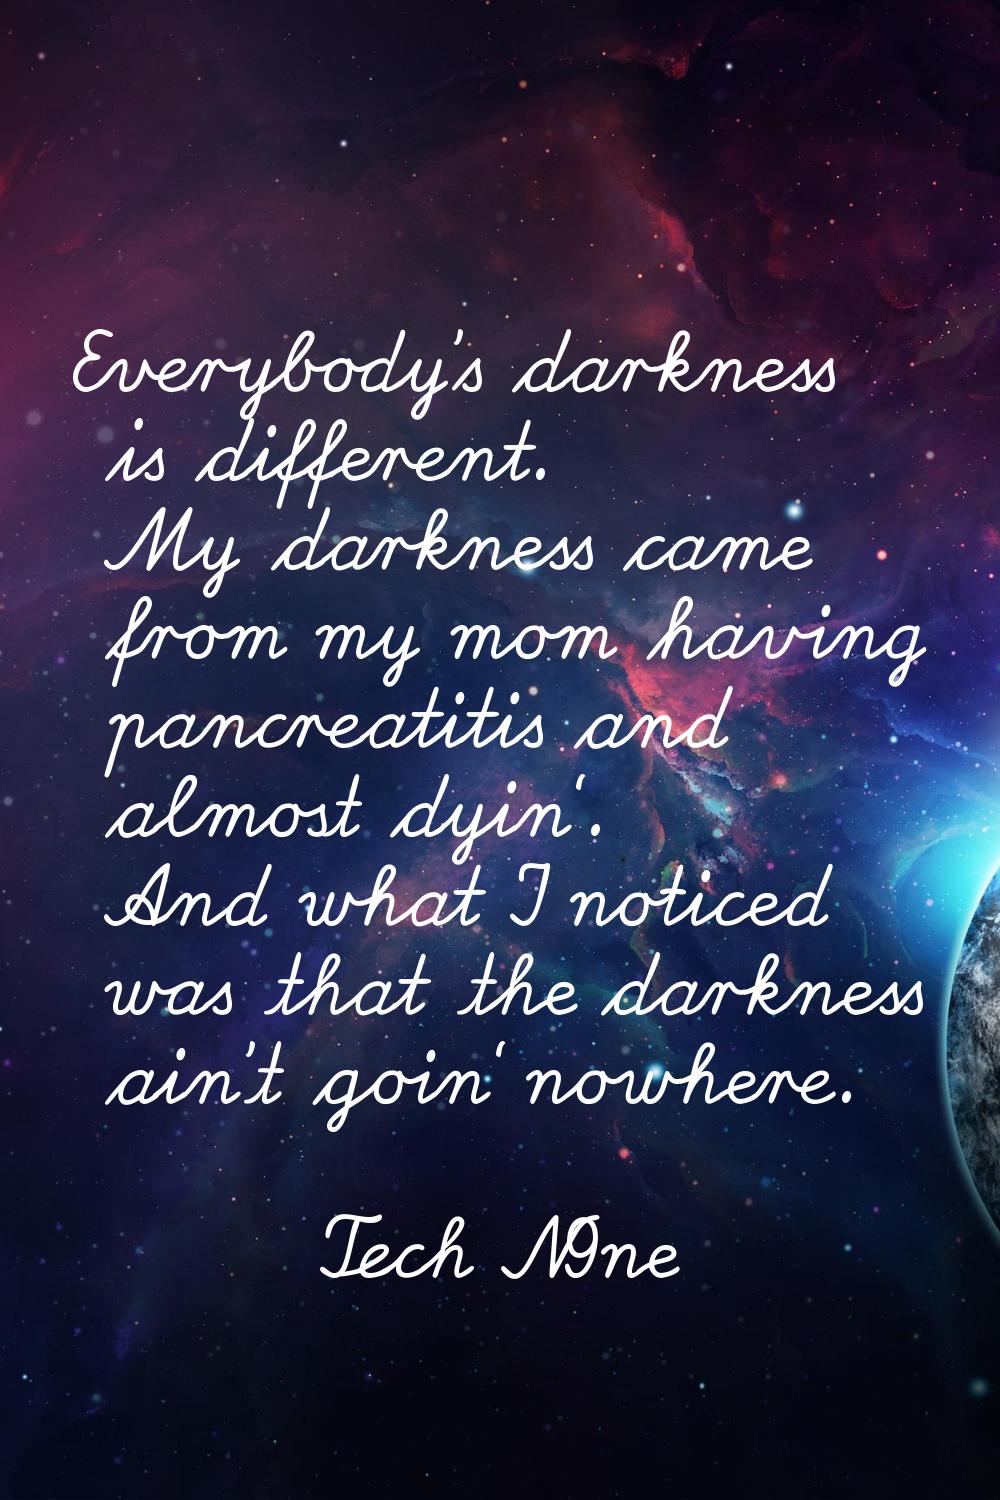 Everybody's darkness is different. My darkness came from my mom having pancreatitis and almost dyin